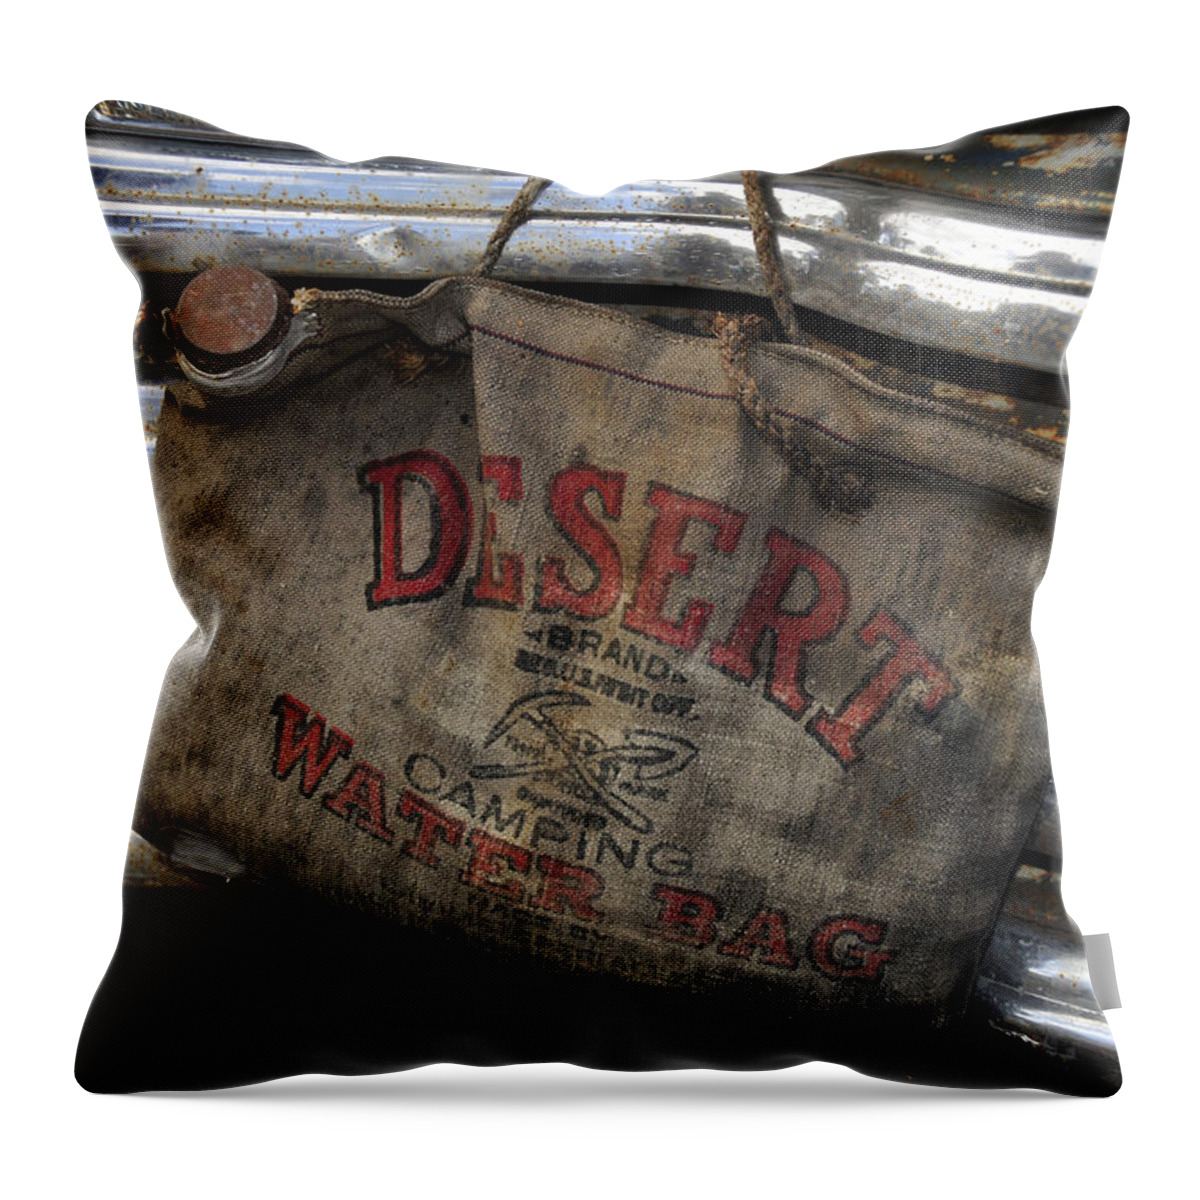 Fine Art Photography Throw Pillow featuring the photograph Desert Water Bag by David Lee Thompson